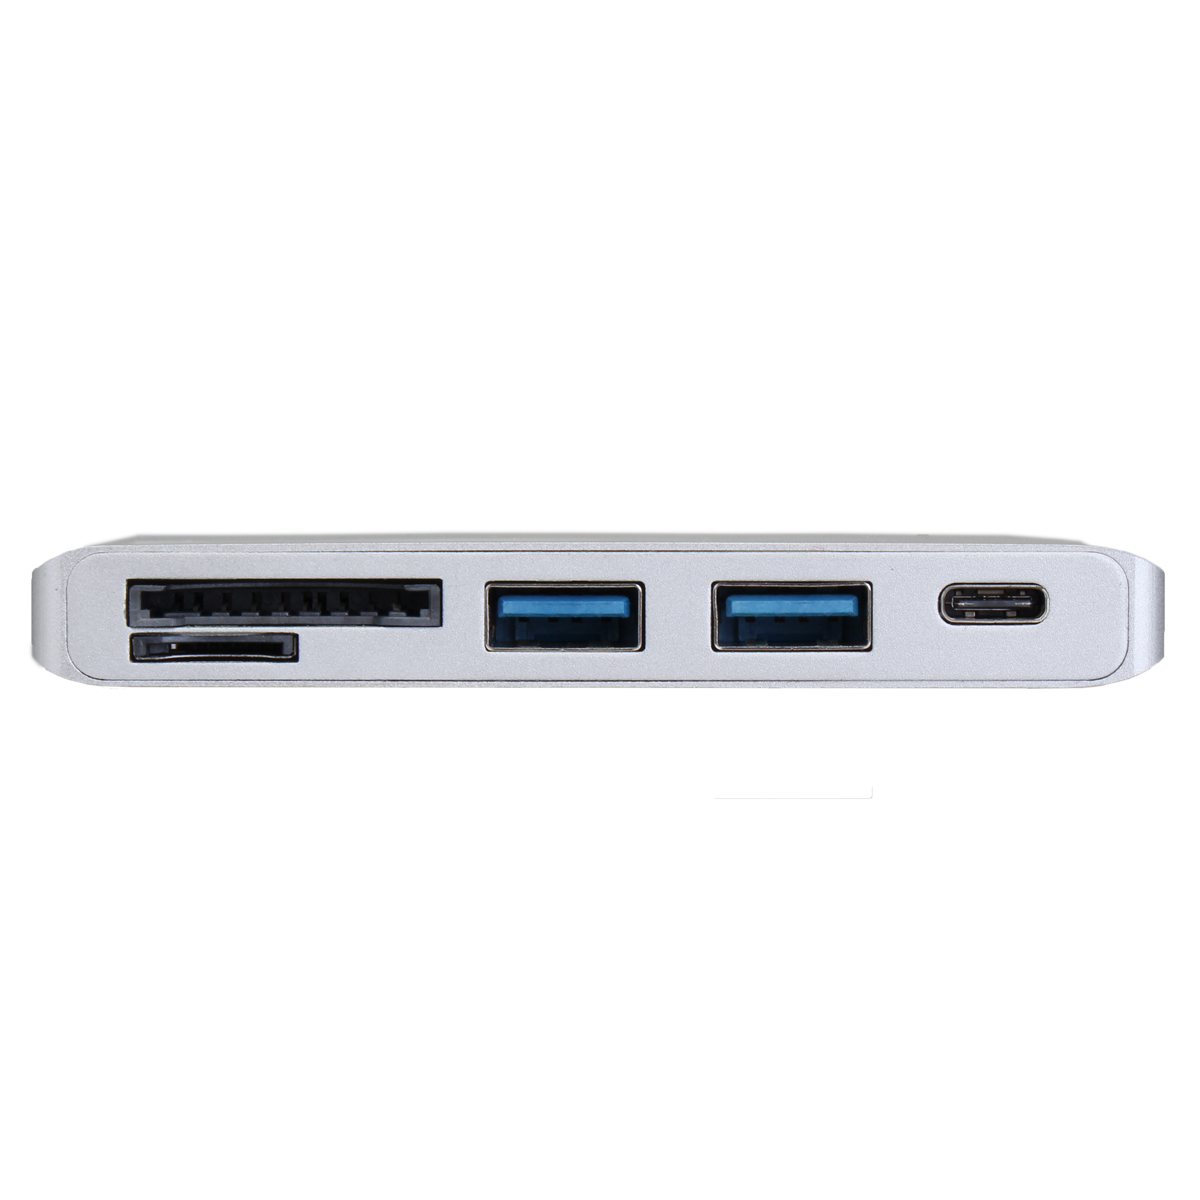 Multifunction-USB-Hub-Type-C-to-Type-C-USB-30-2Ports-TF-SD-Card-Reader-for-Laptop-PC-1153671-7